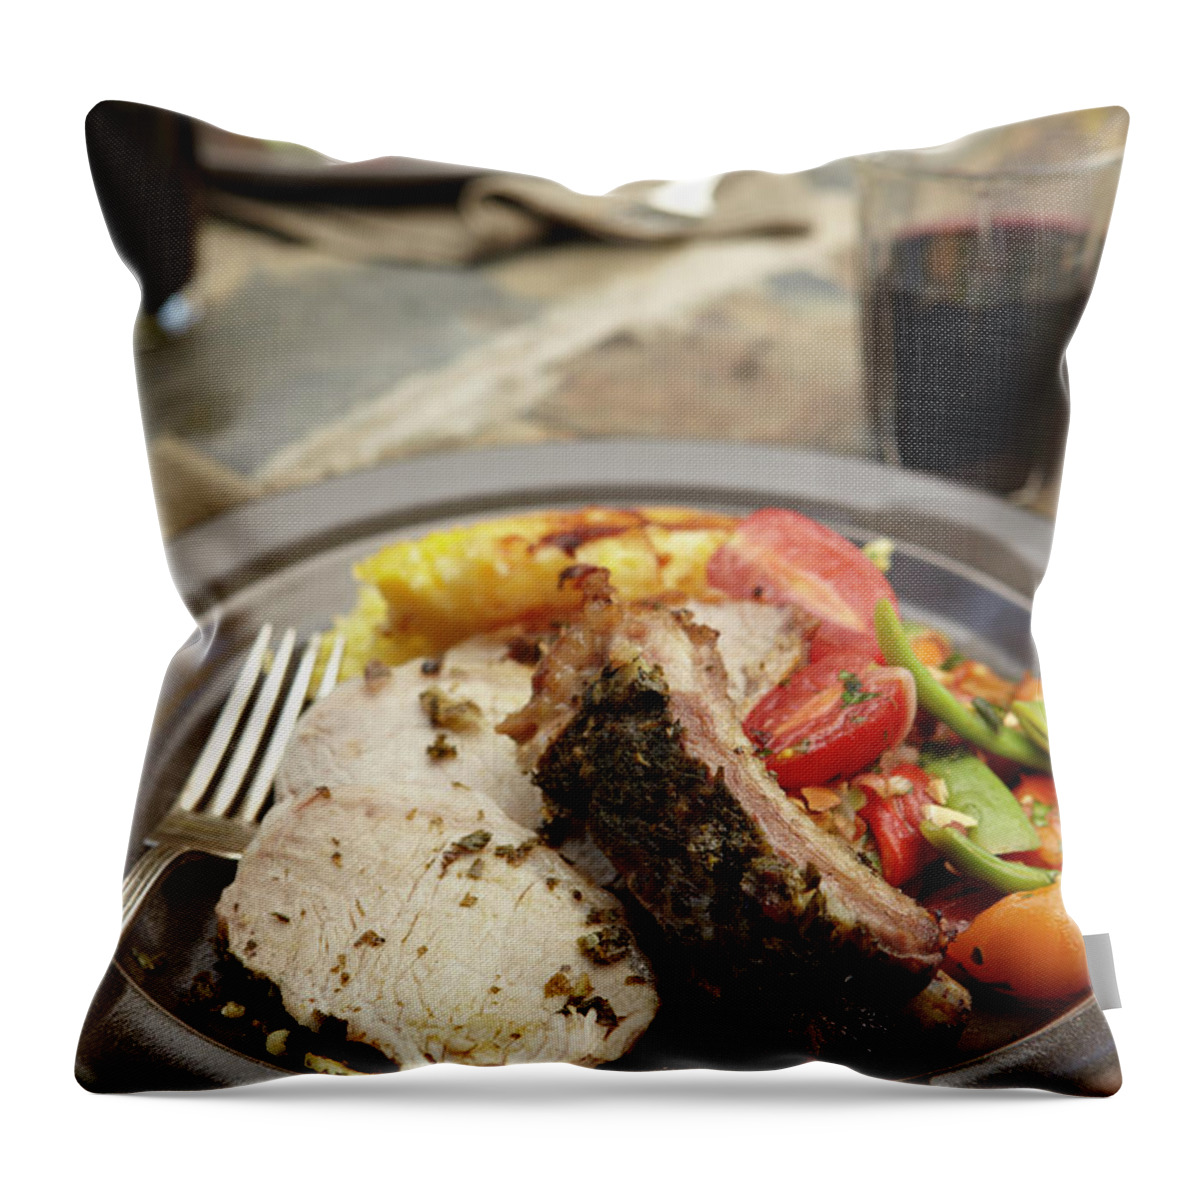 Alcohol Throw Pillow featuring the photograph Pork And Ribs With Vegetables by James Baigrie